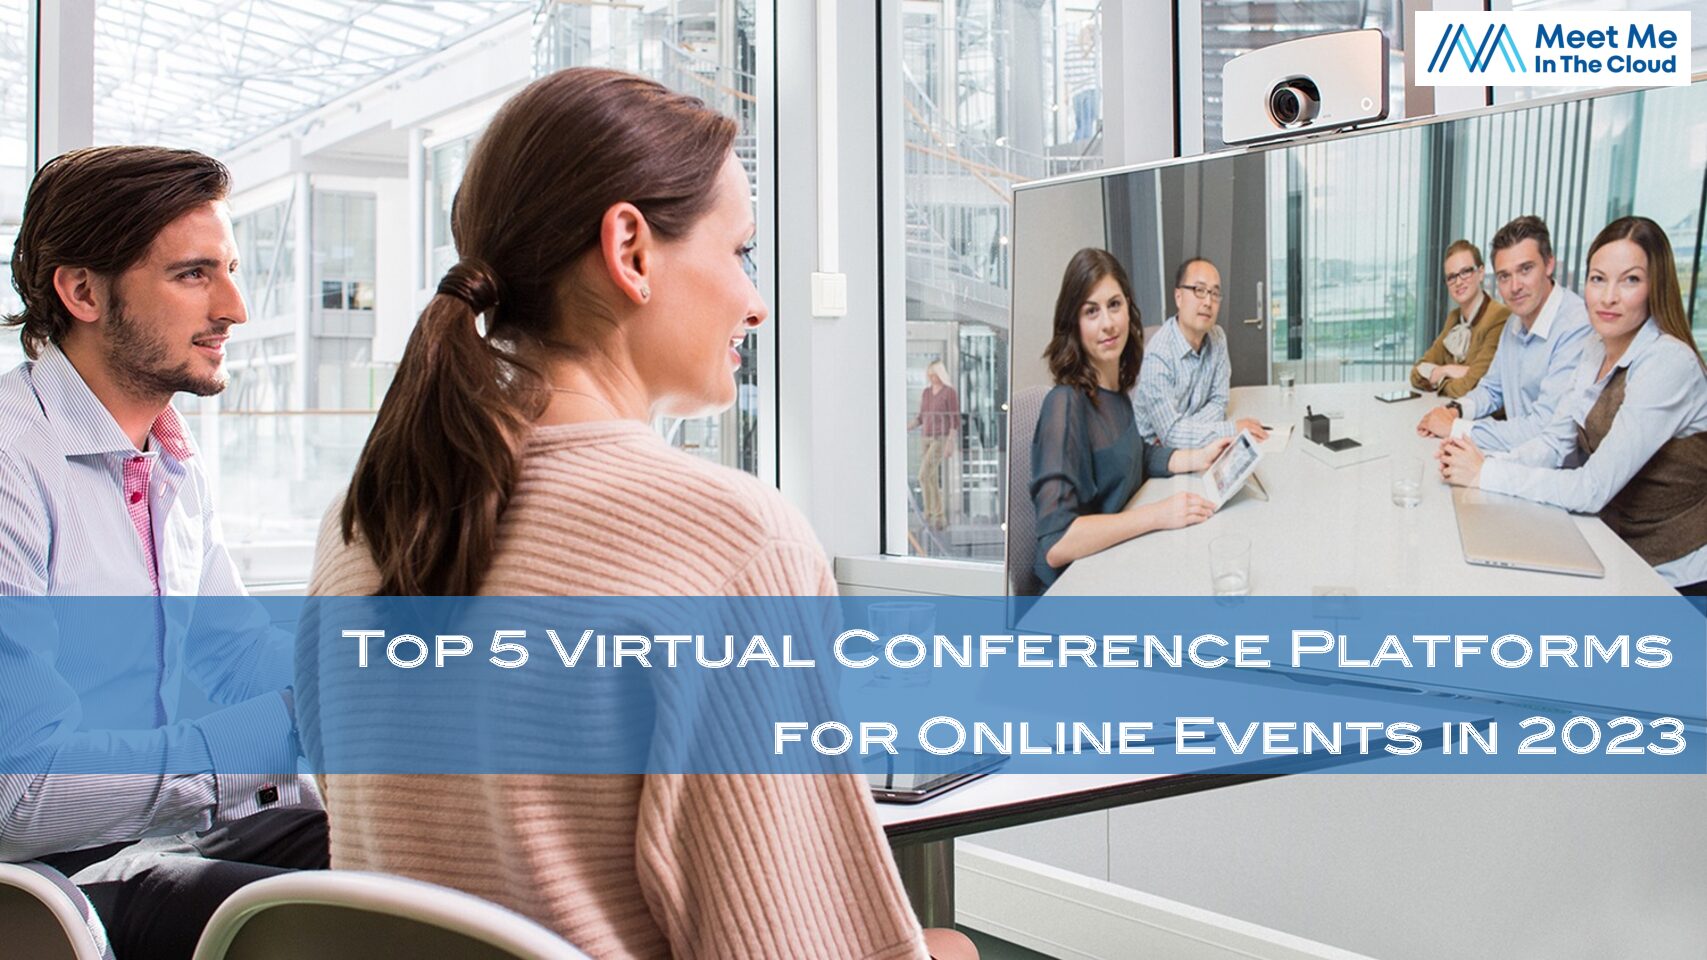 Top 5 Virtual Conference Platforms For Online Events in 2023